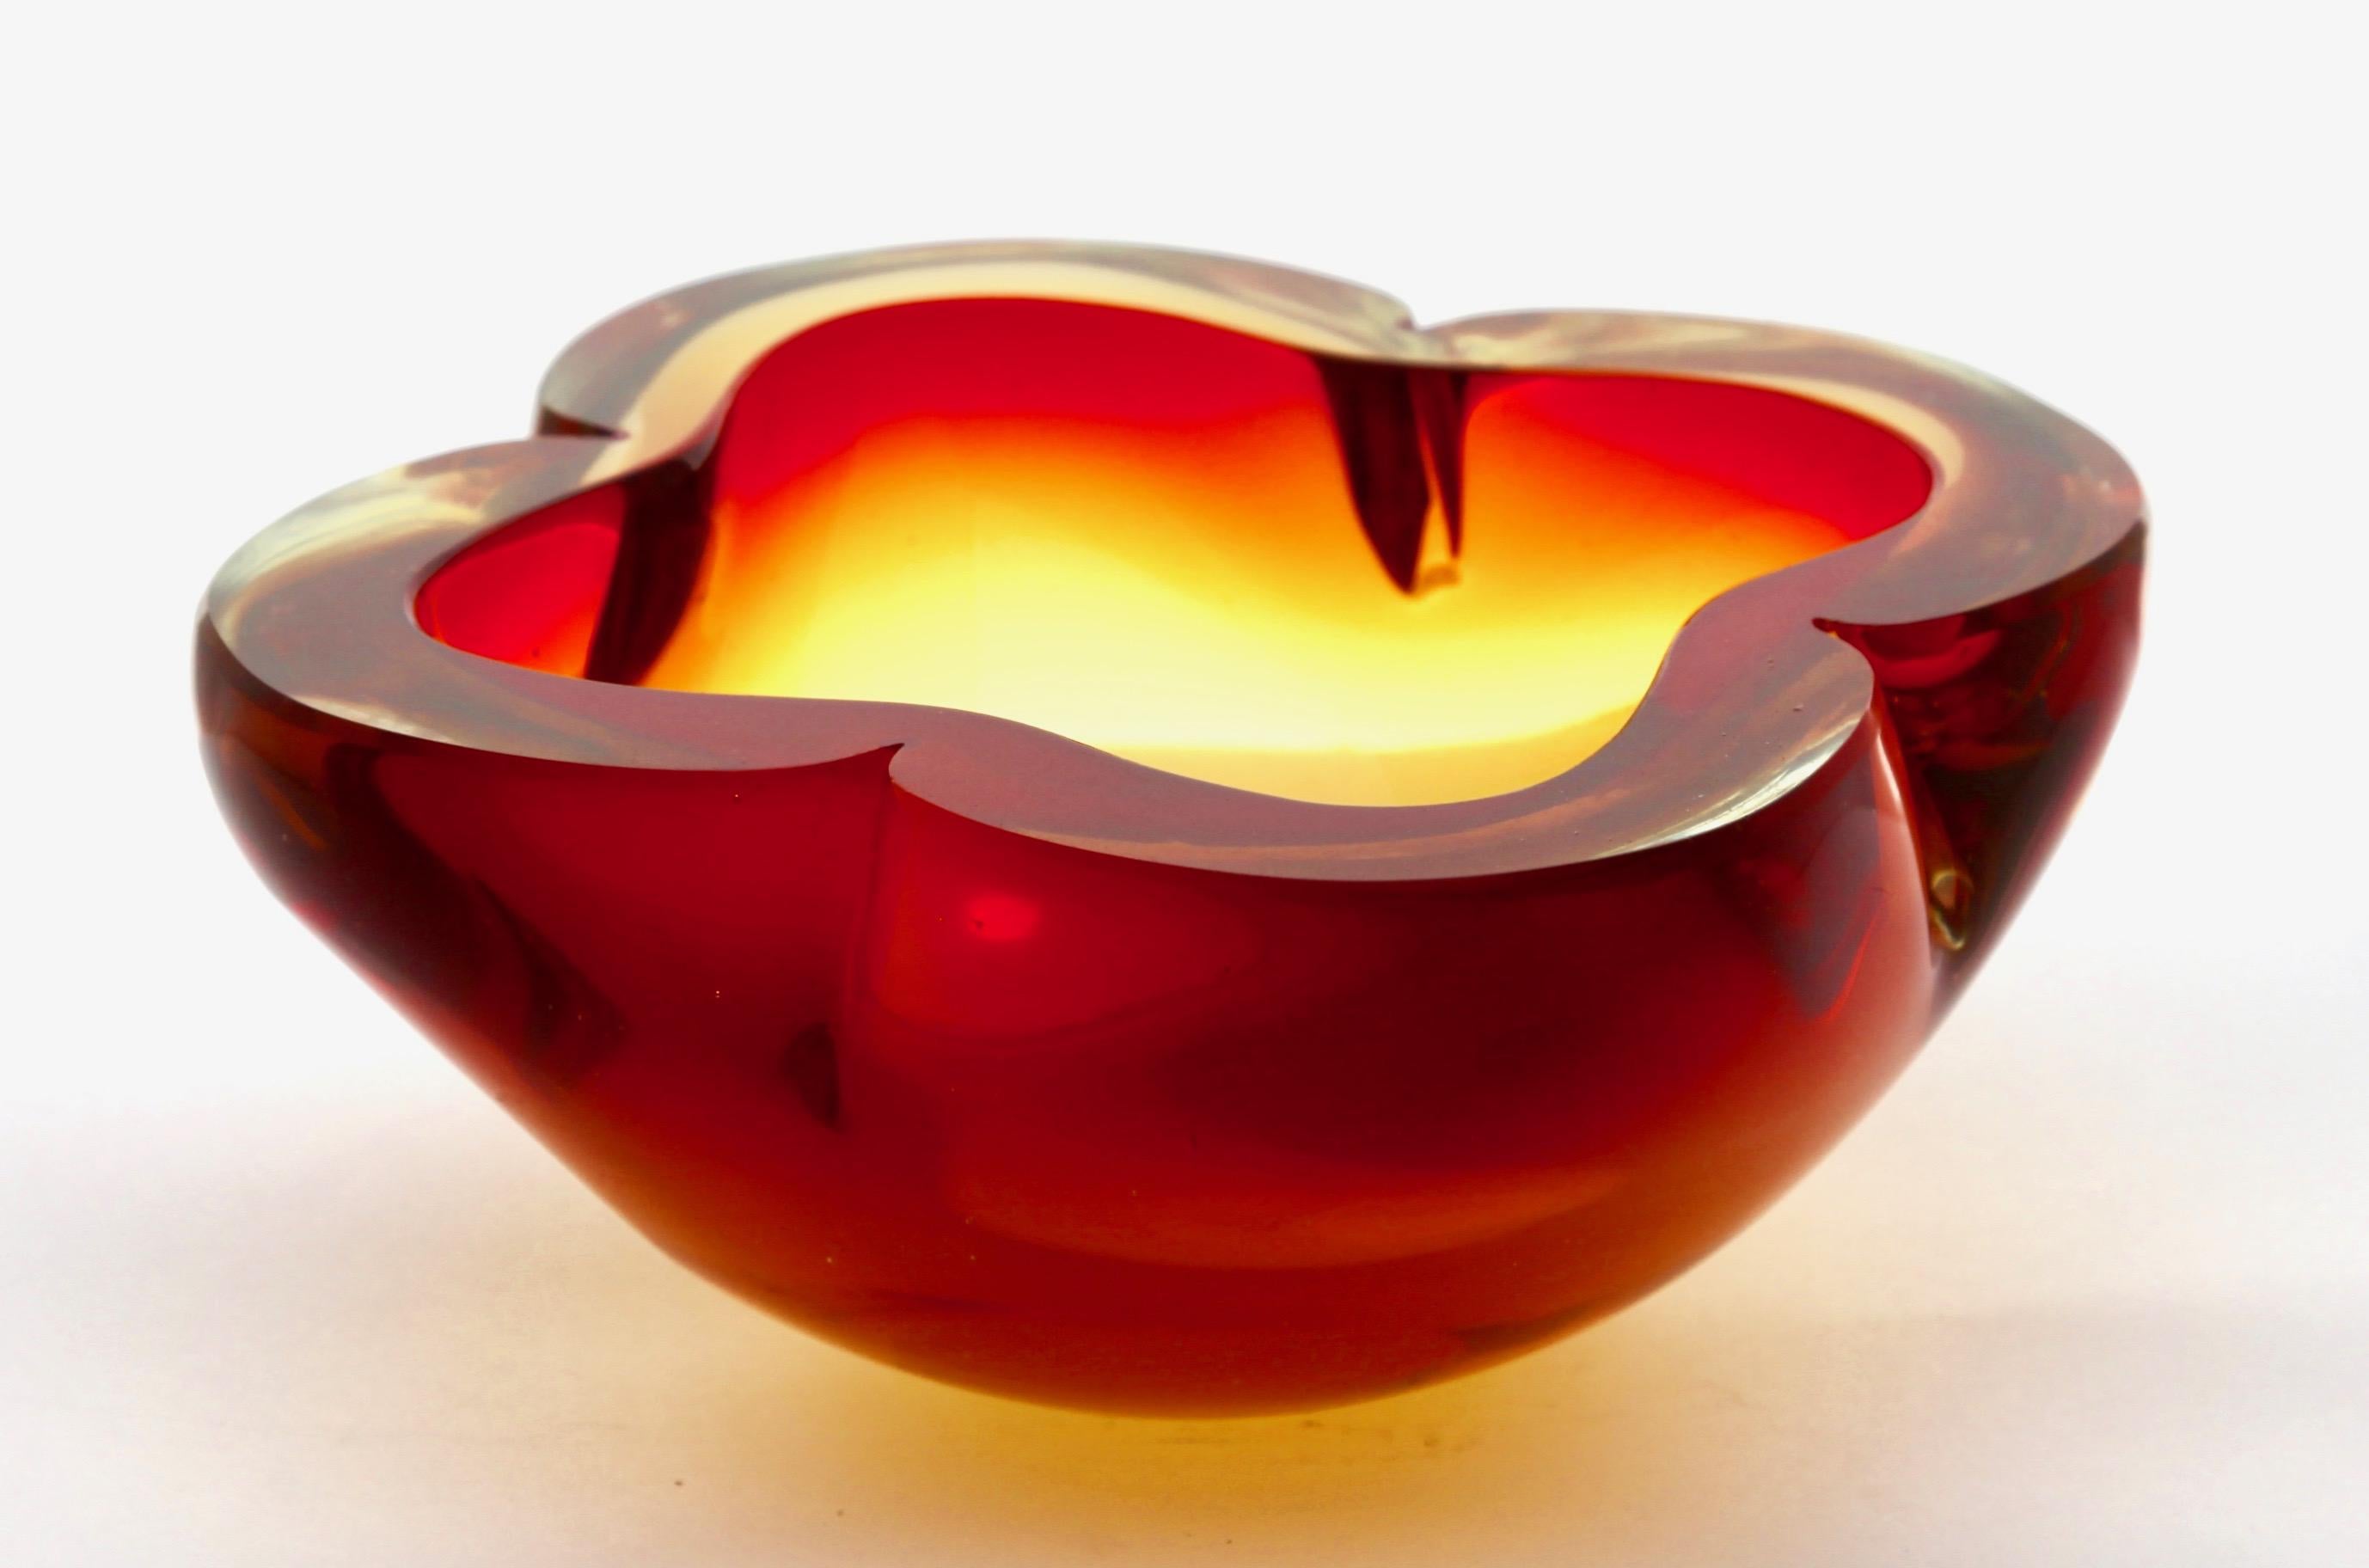 Mid-Century Modern Murano Glass Bowl with Four Lobes, Attributed to Flavio Poli for Seguso